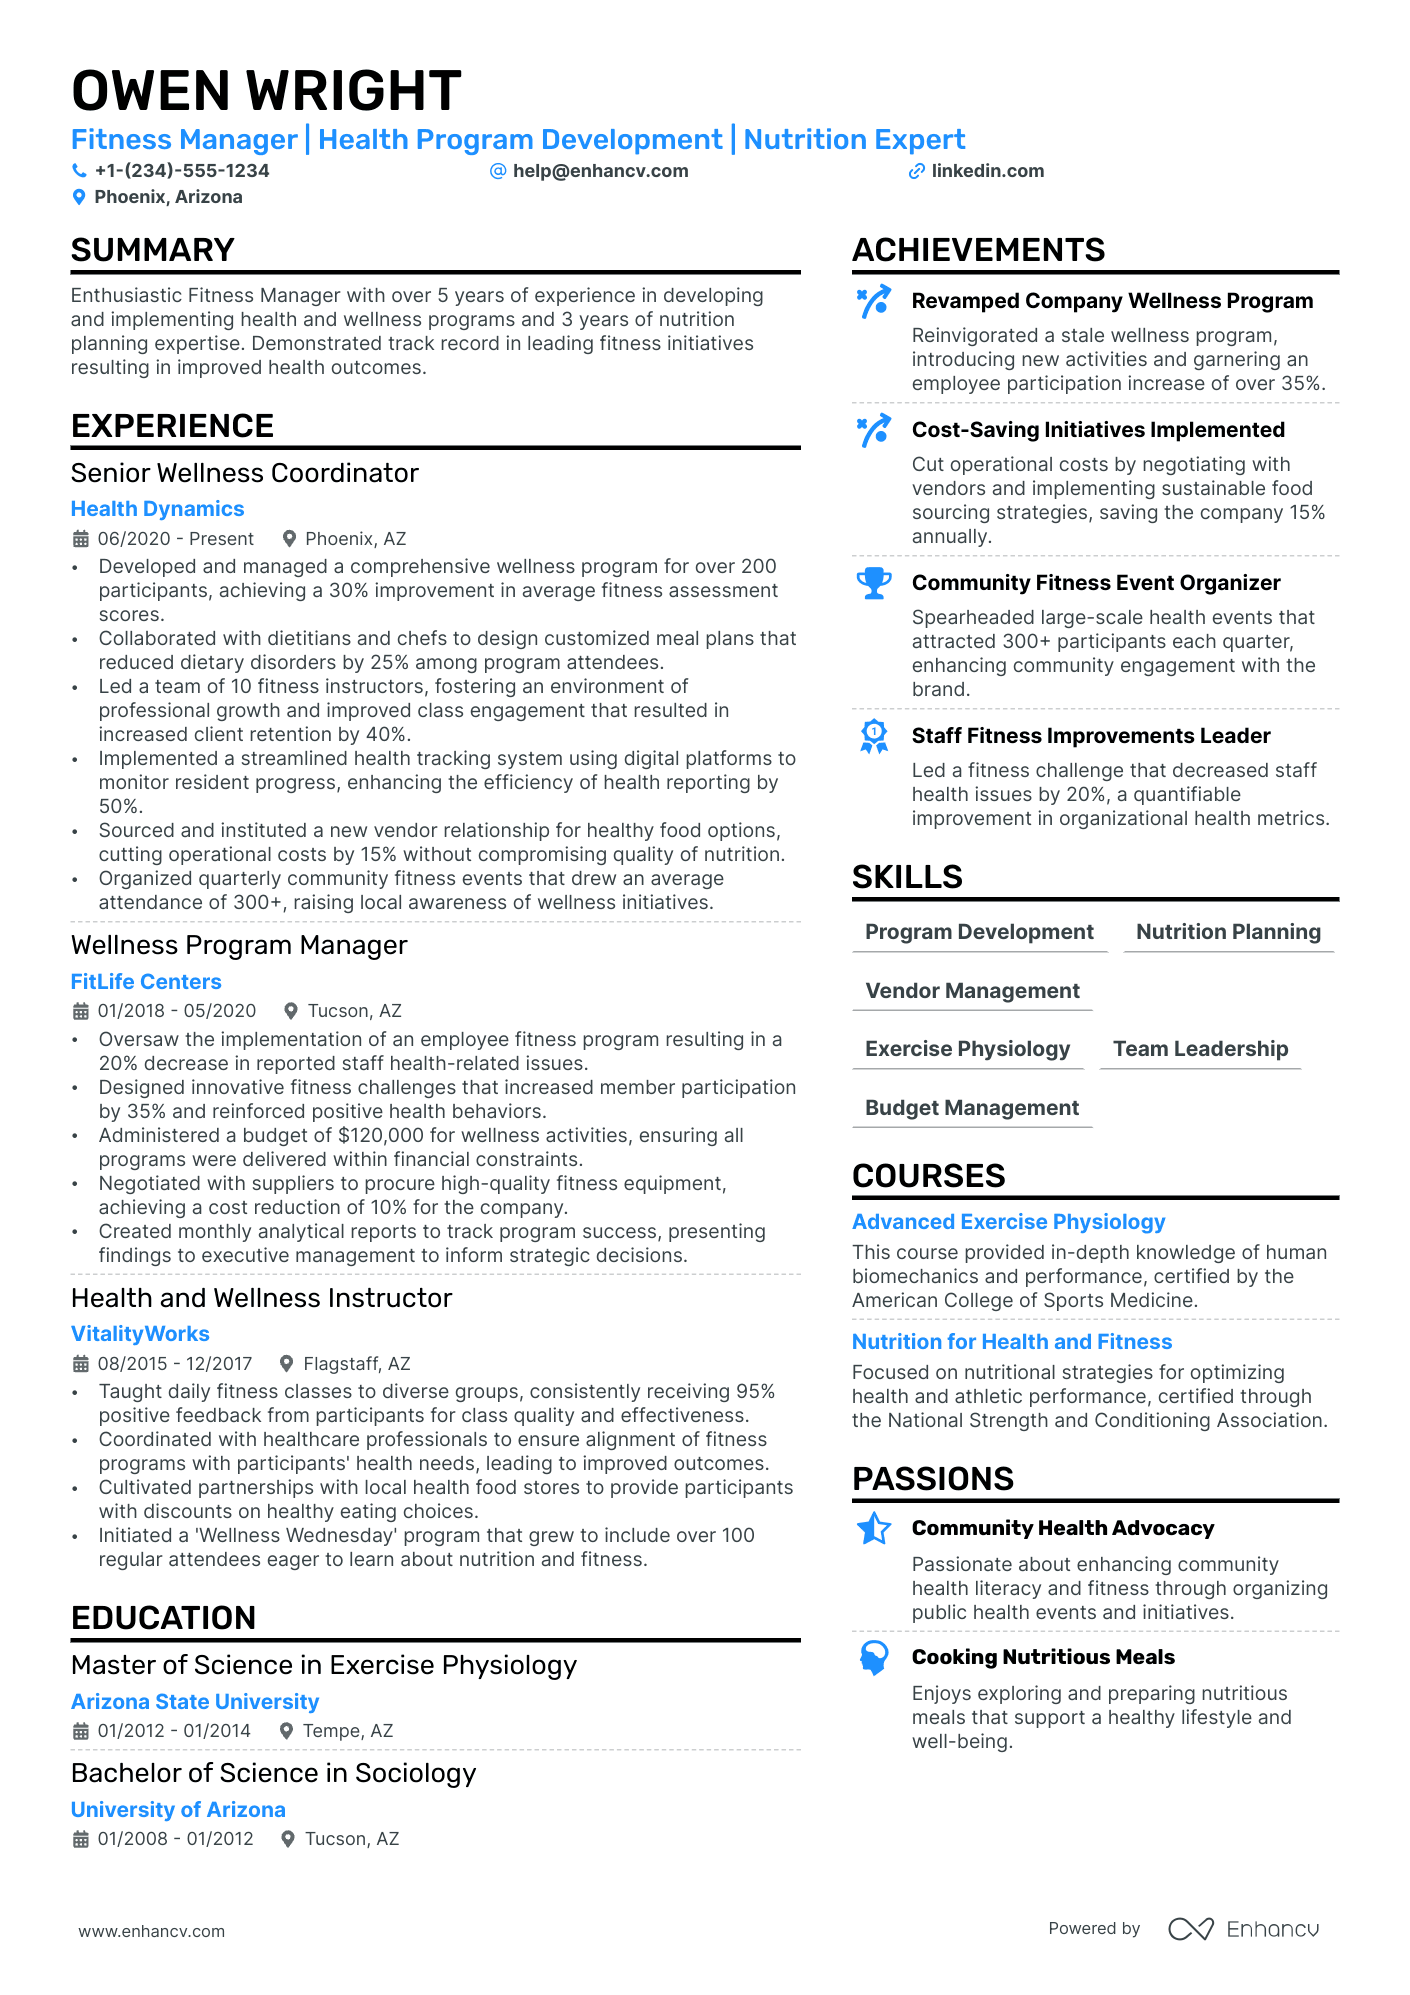 Fitness Manager resume example